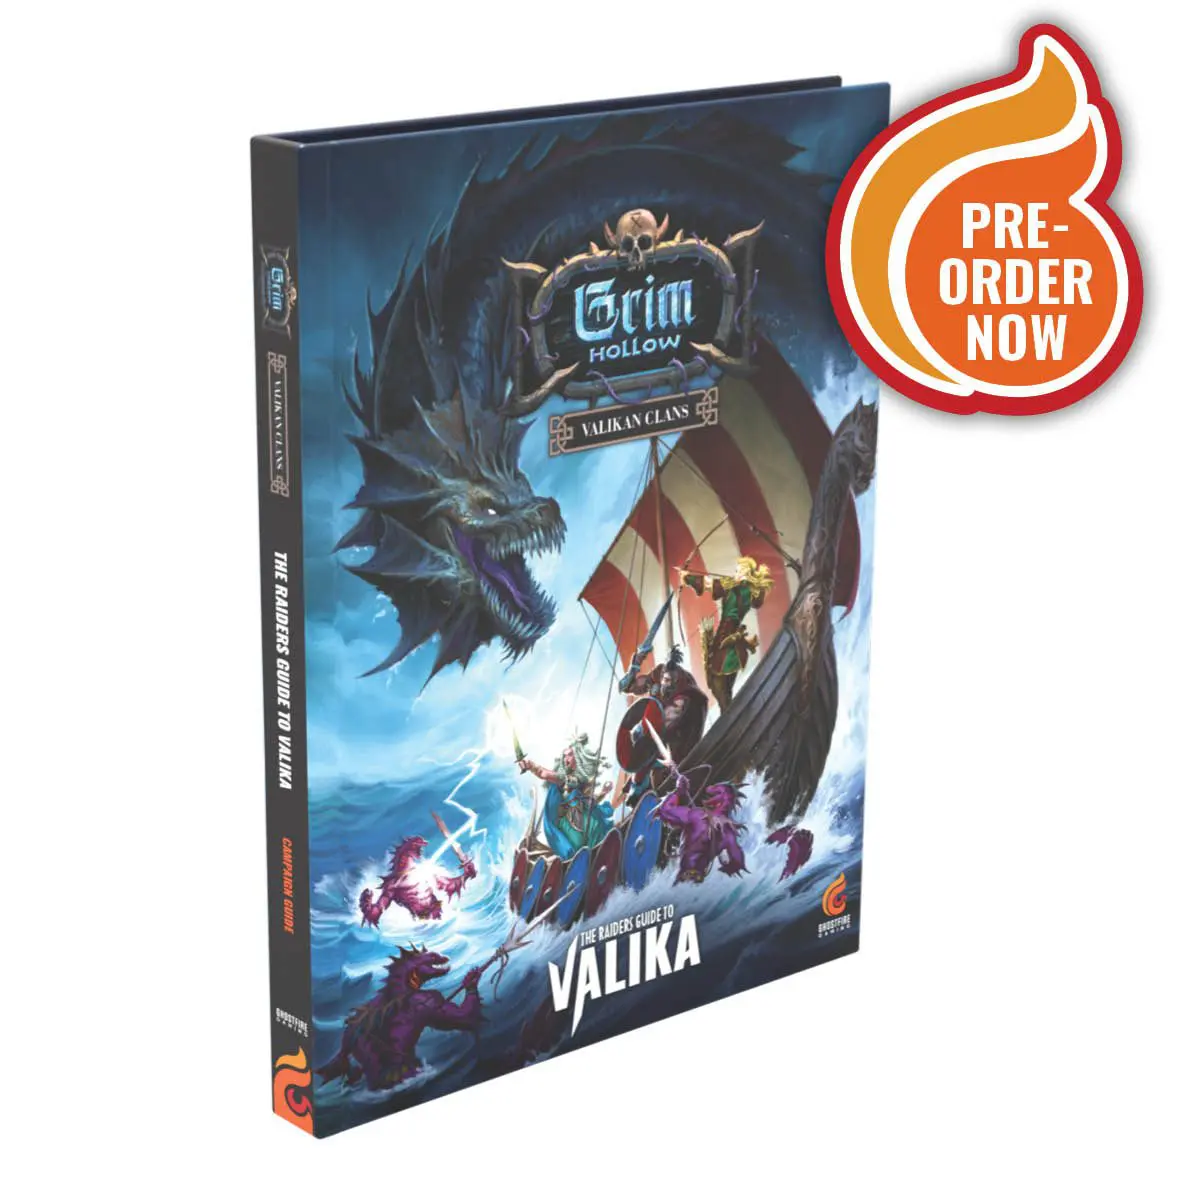 Grim Hollow: the Raider’s Guide to Valika